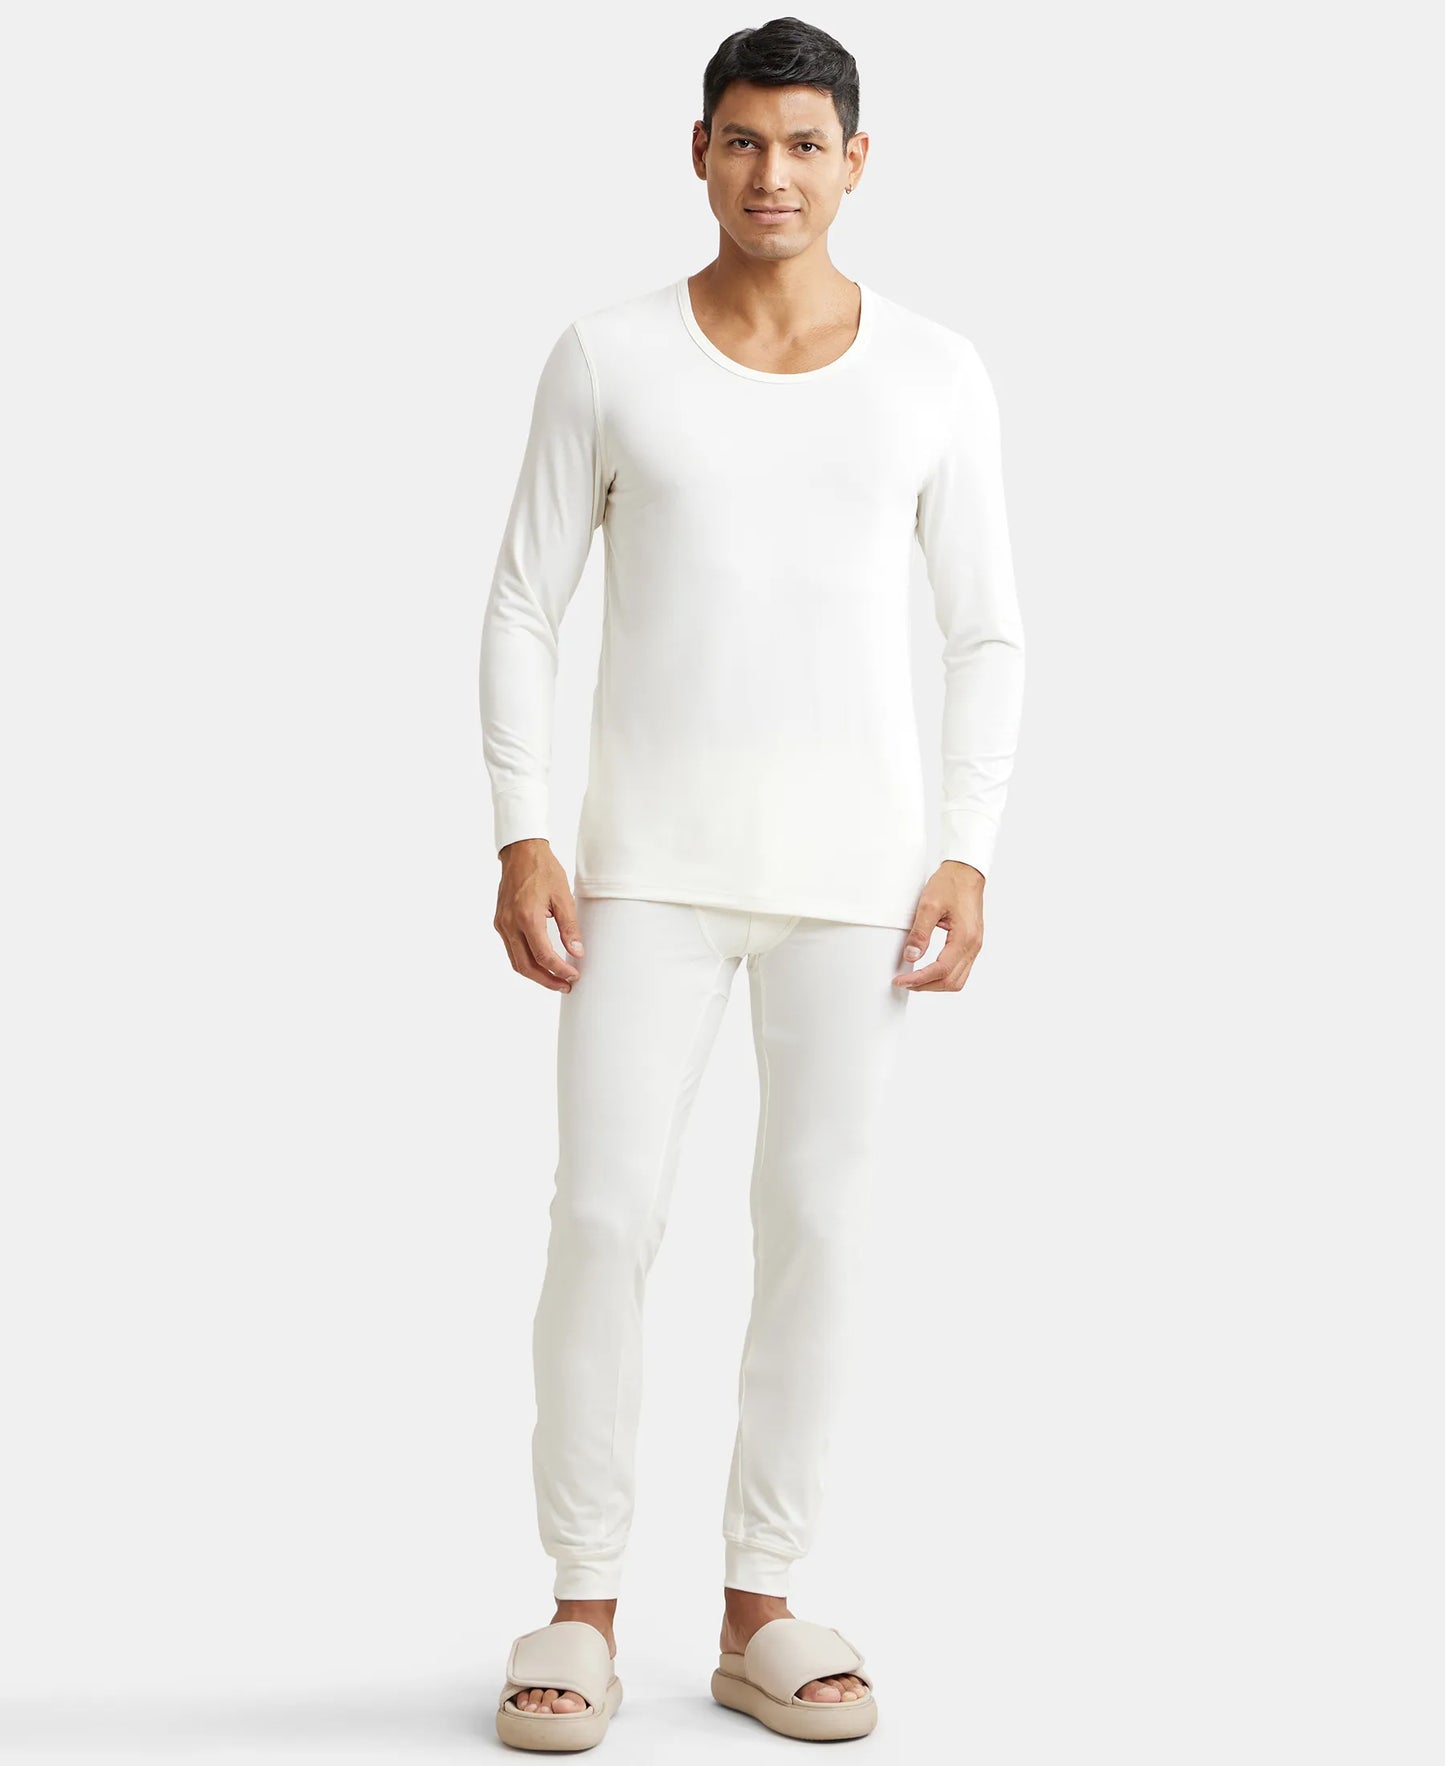 Soft Touch Microfiber Elastane Stretch Thermal Long Johns with StayWarm Technology - White-4